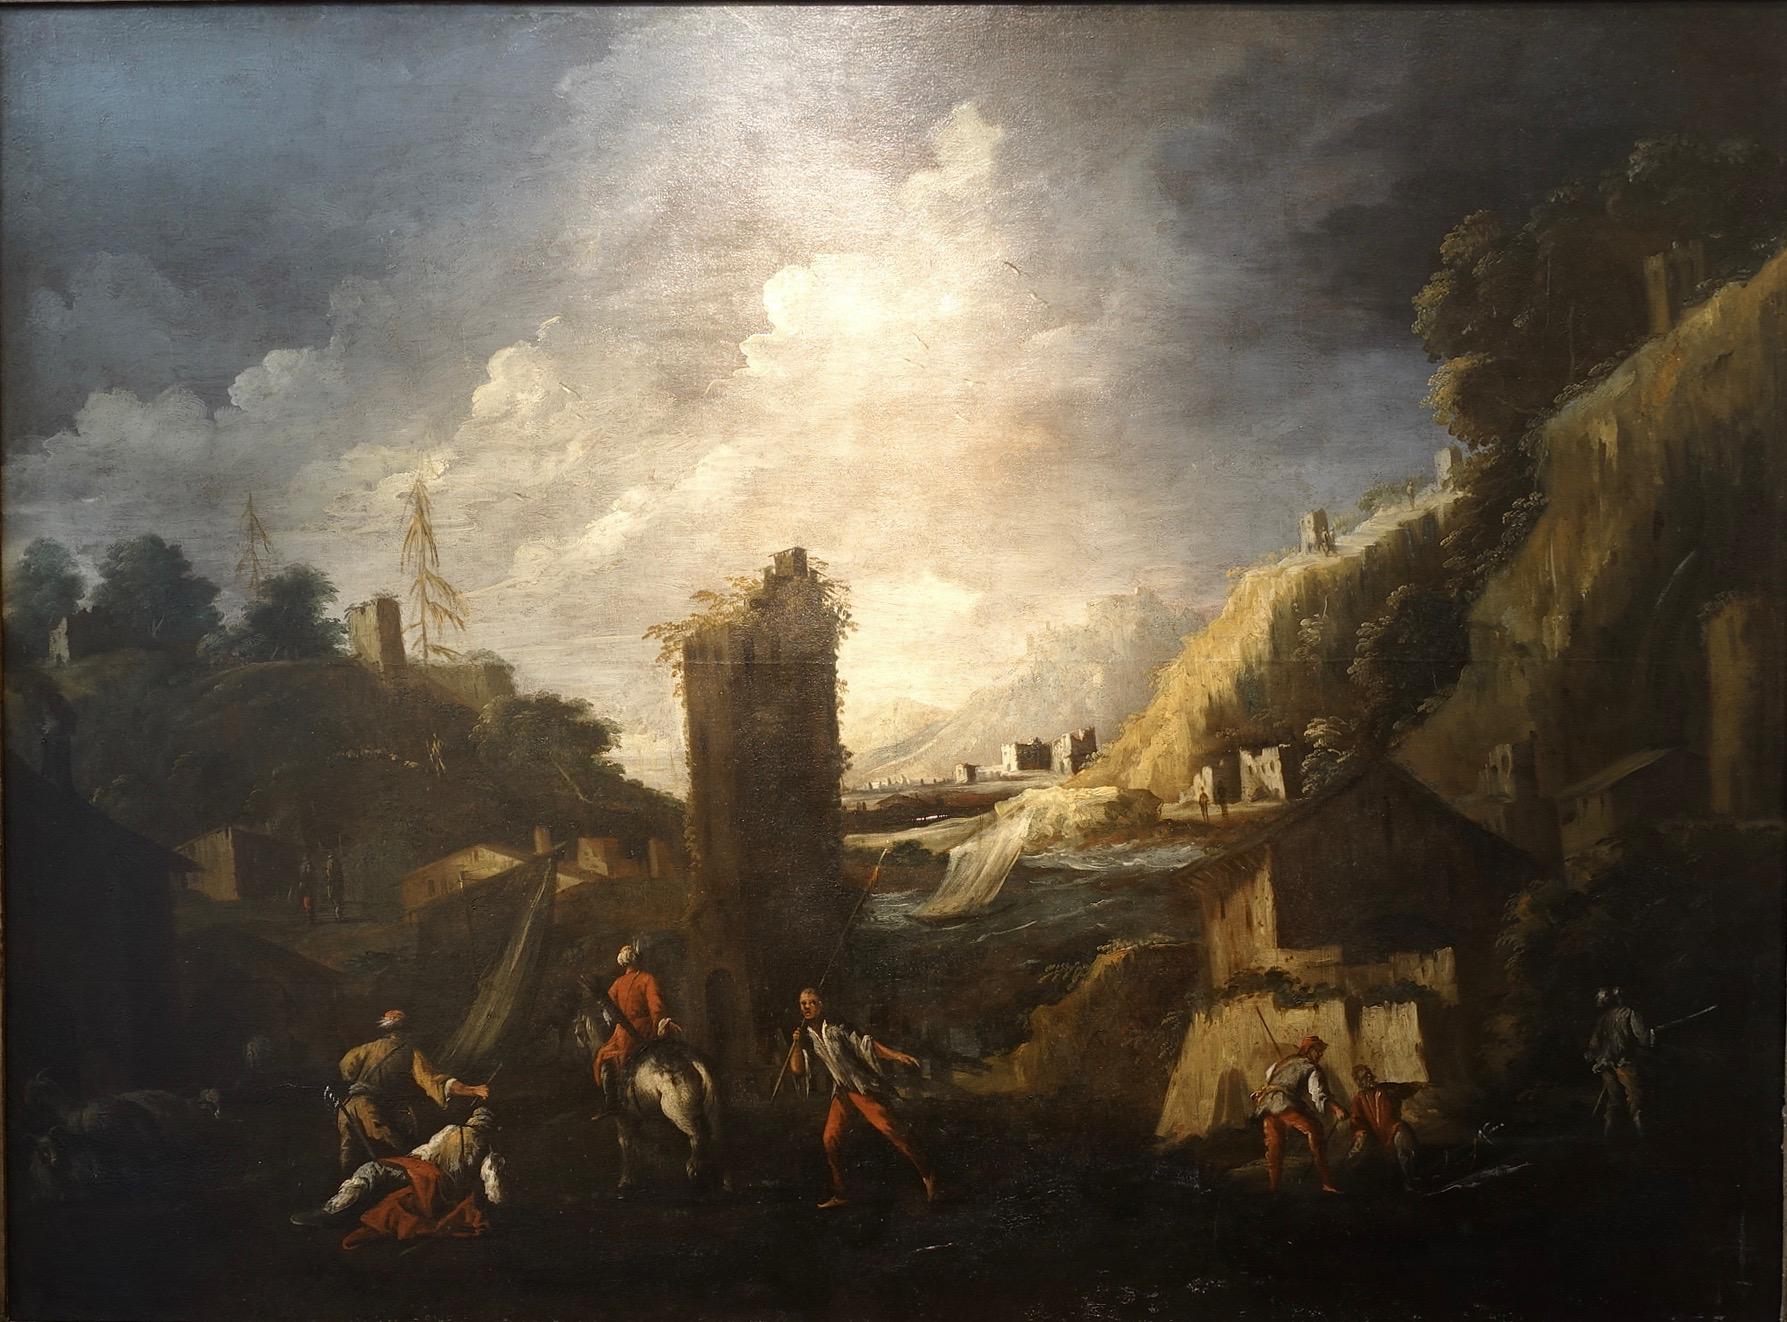 Antonio Travi called Le Sestri (Sestri Ponente, 1608 - Genova 1665)
Seascape with ruins 
Genova, First half of 17th century 
Oil on canvas with his original 17th century frame 
Measures: 170 x 200 cm

This painting has been studied by